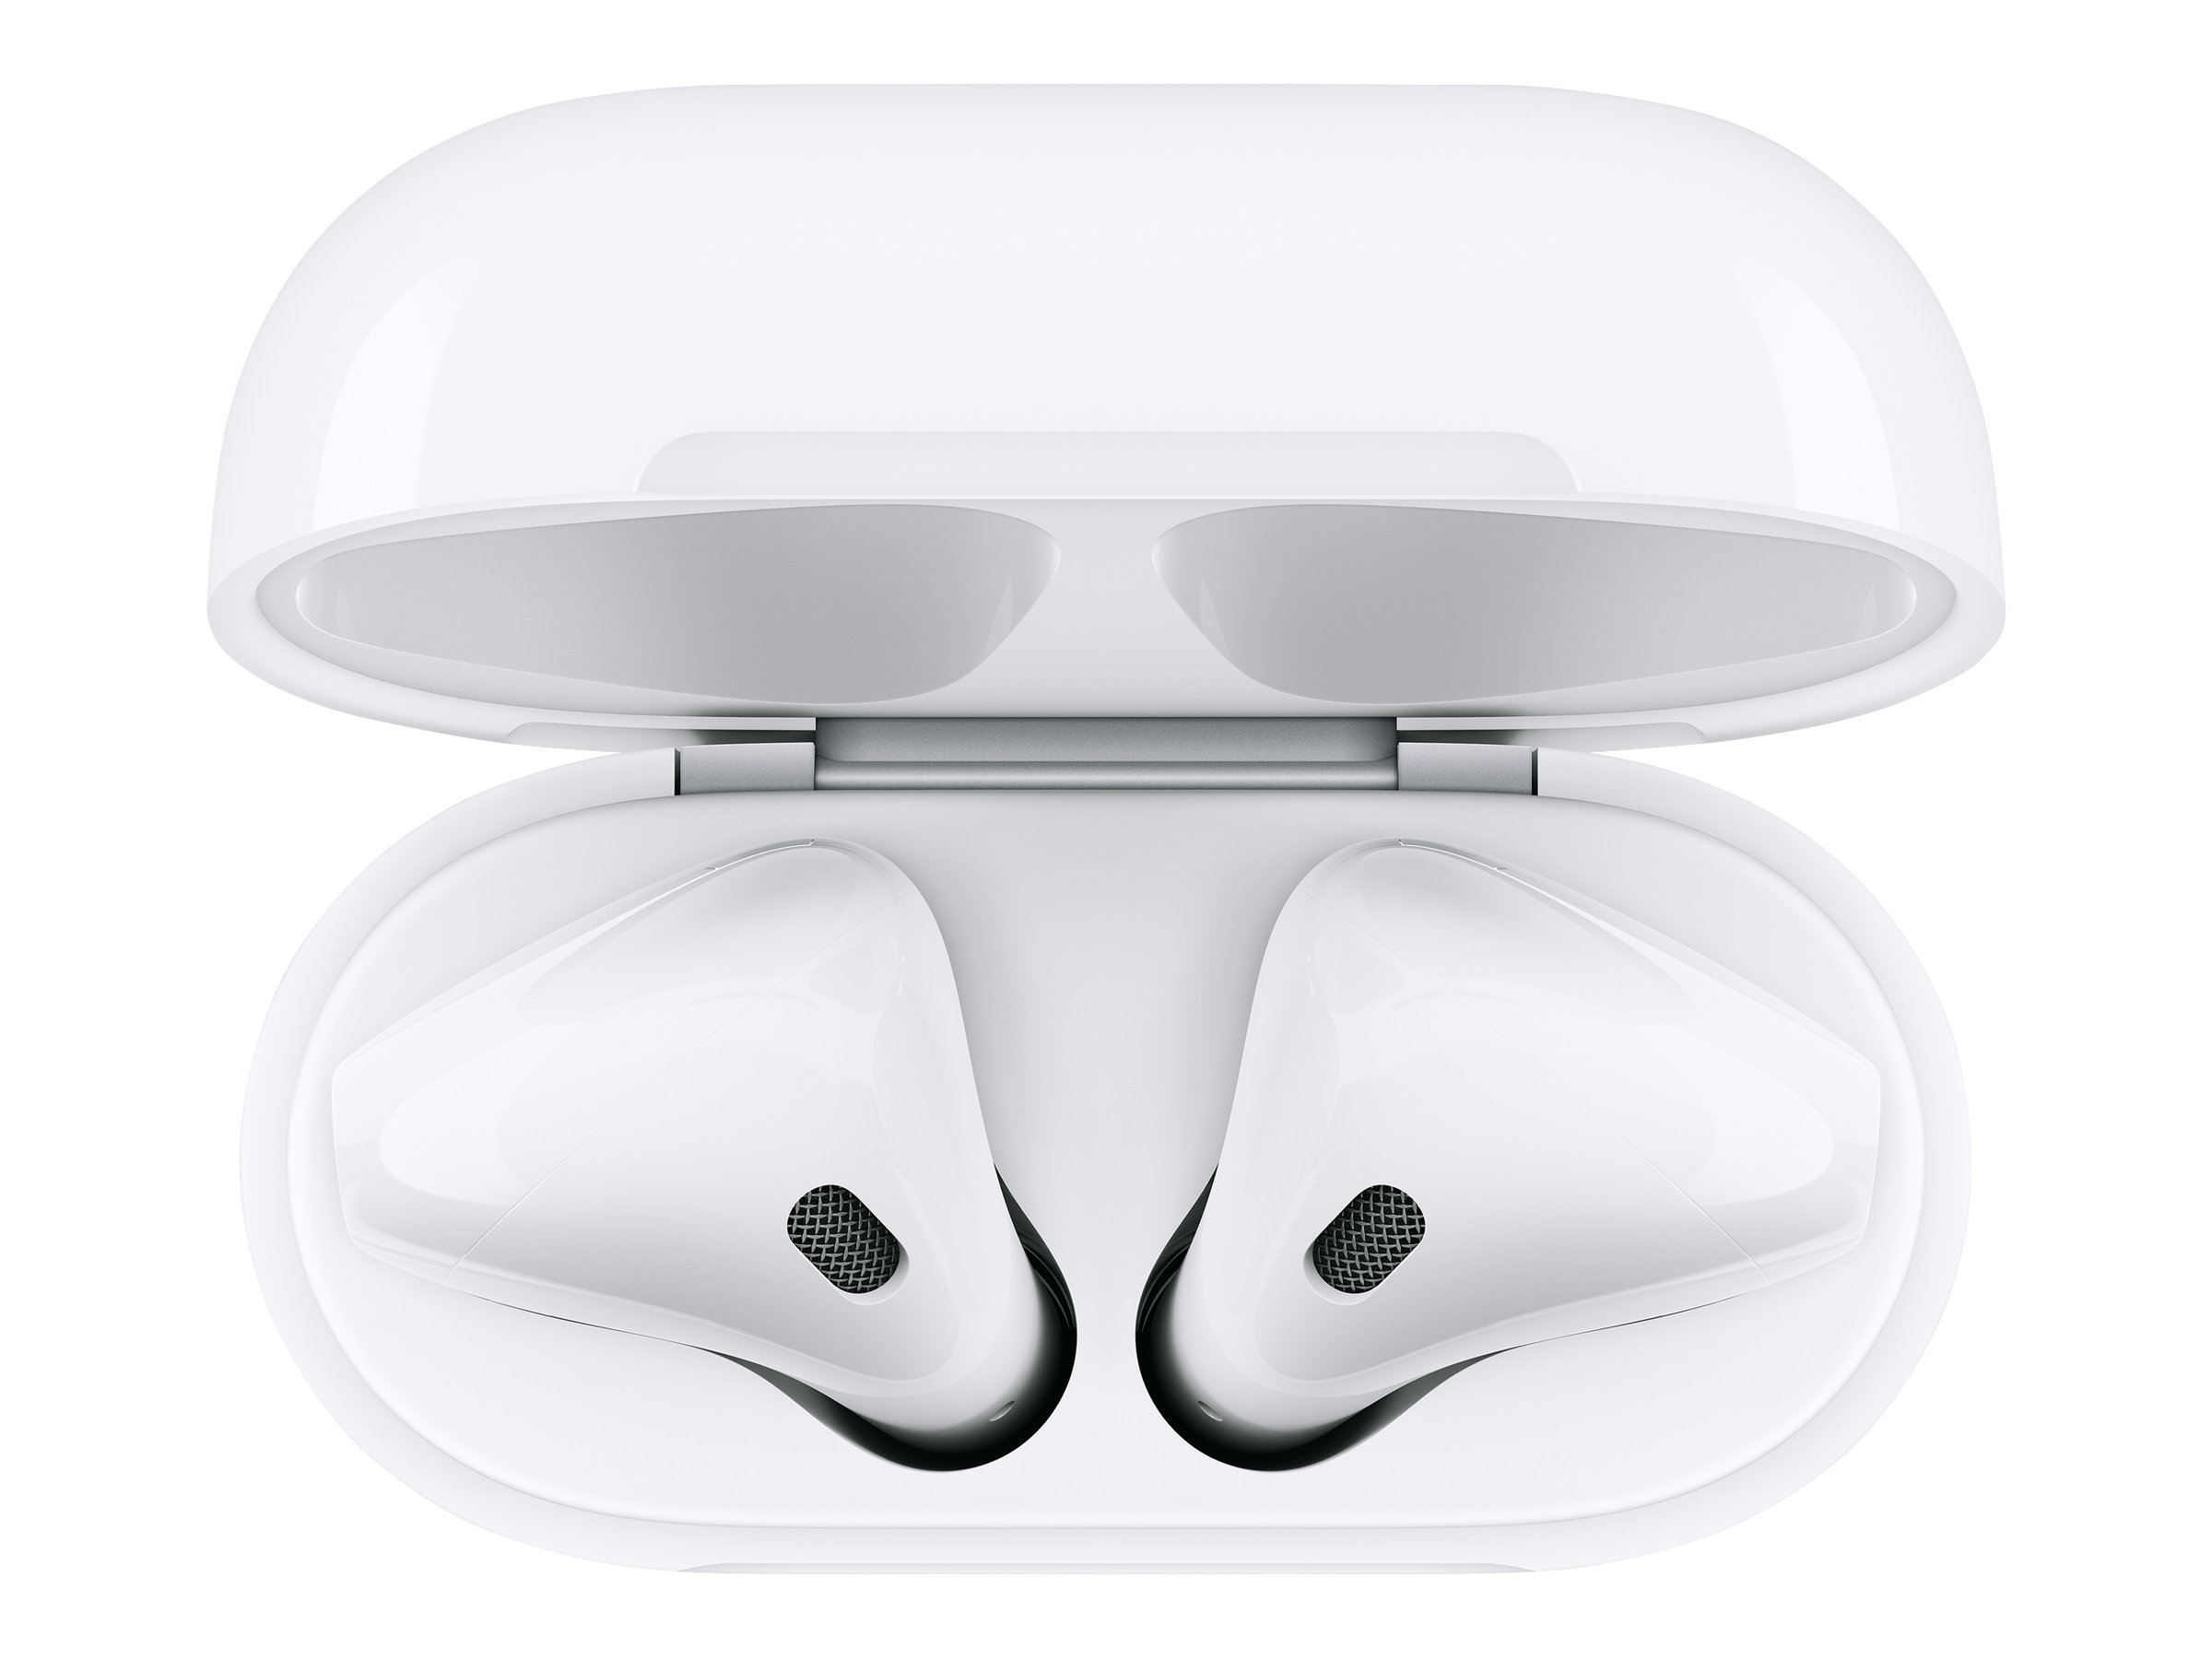 Apple AirPods with Wireless Charging Case - 2. Generation